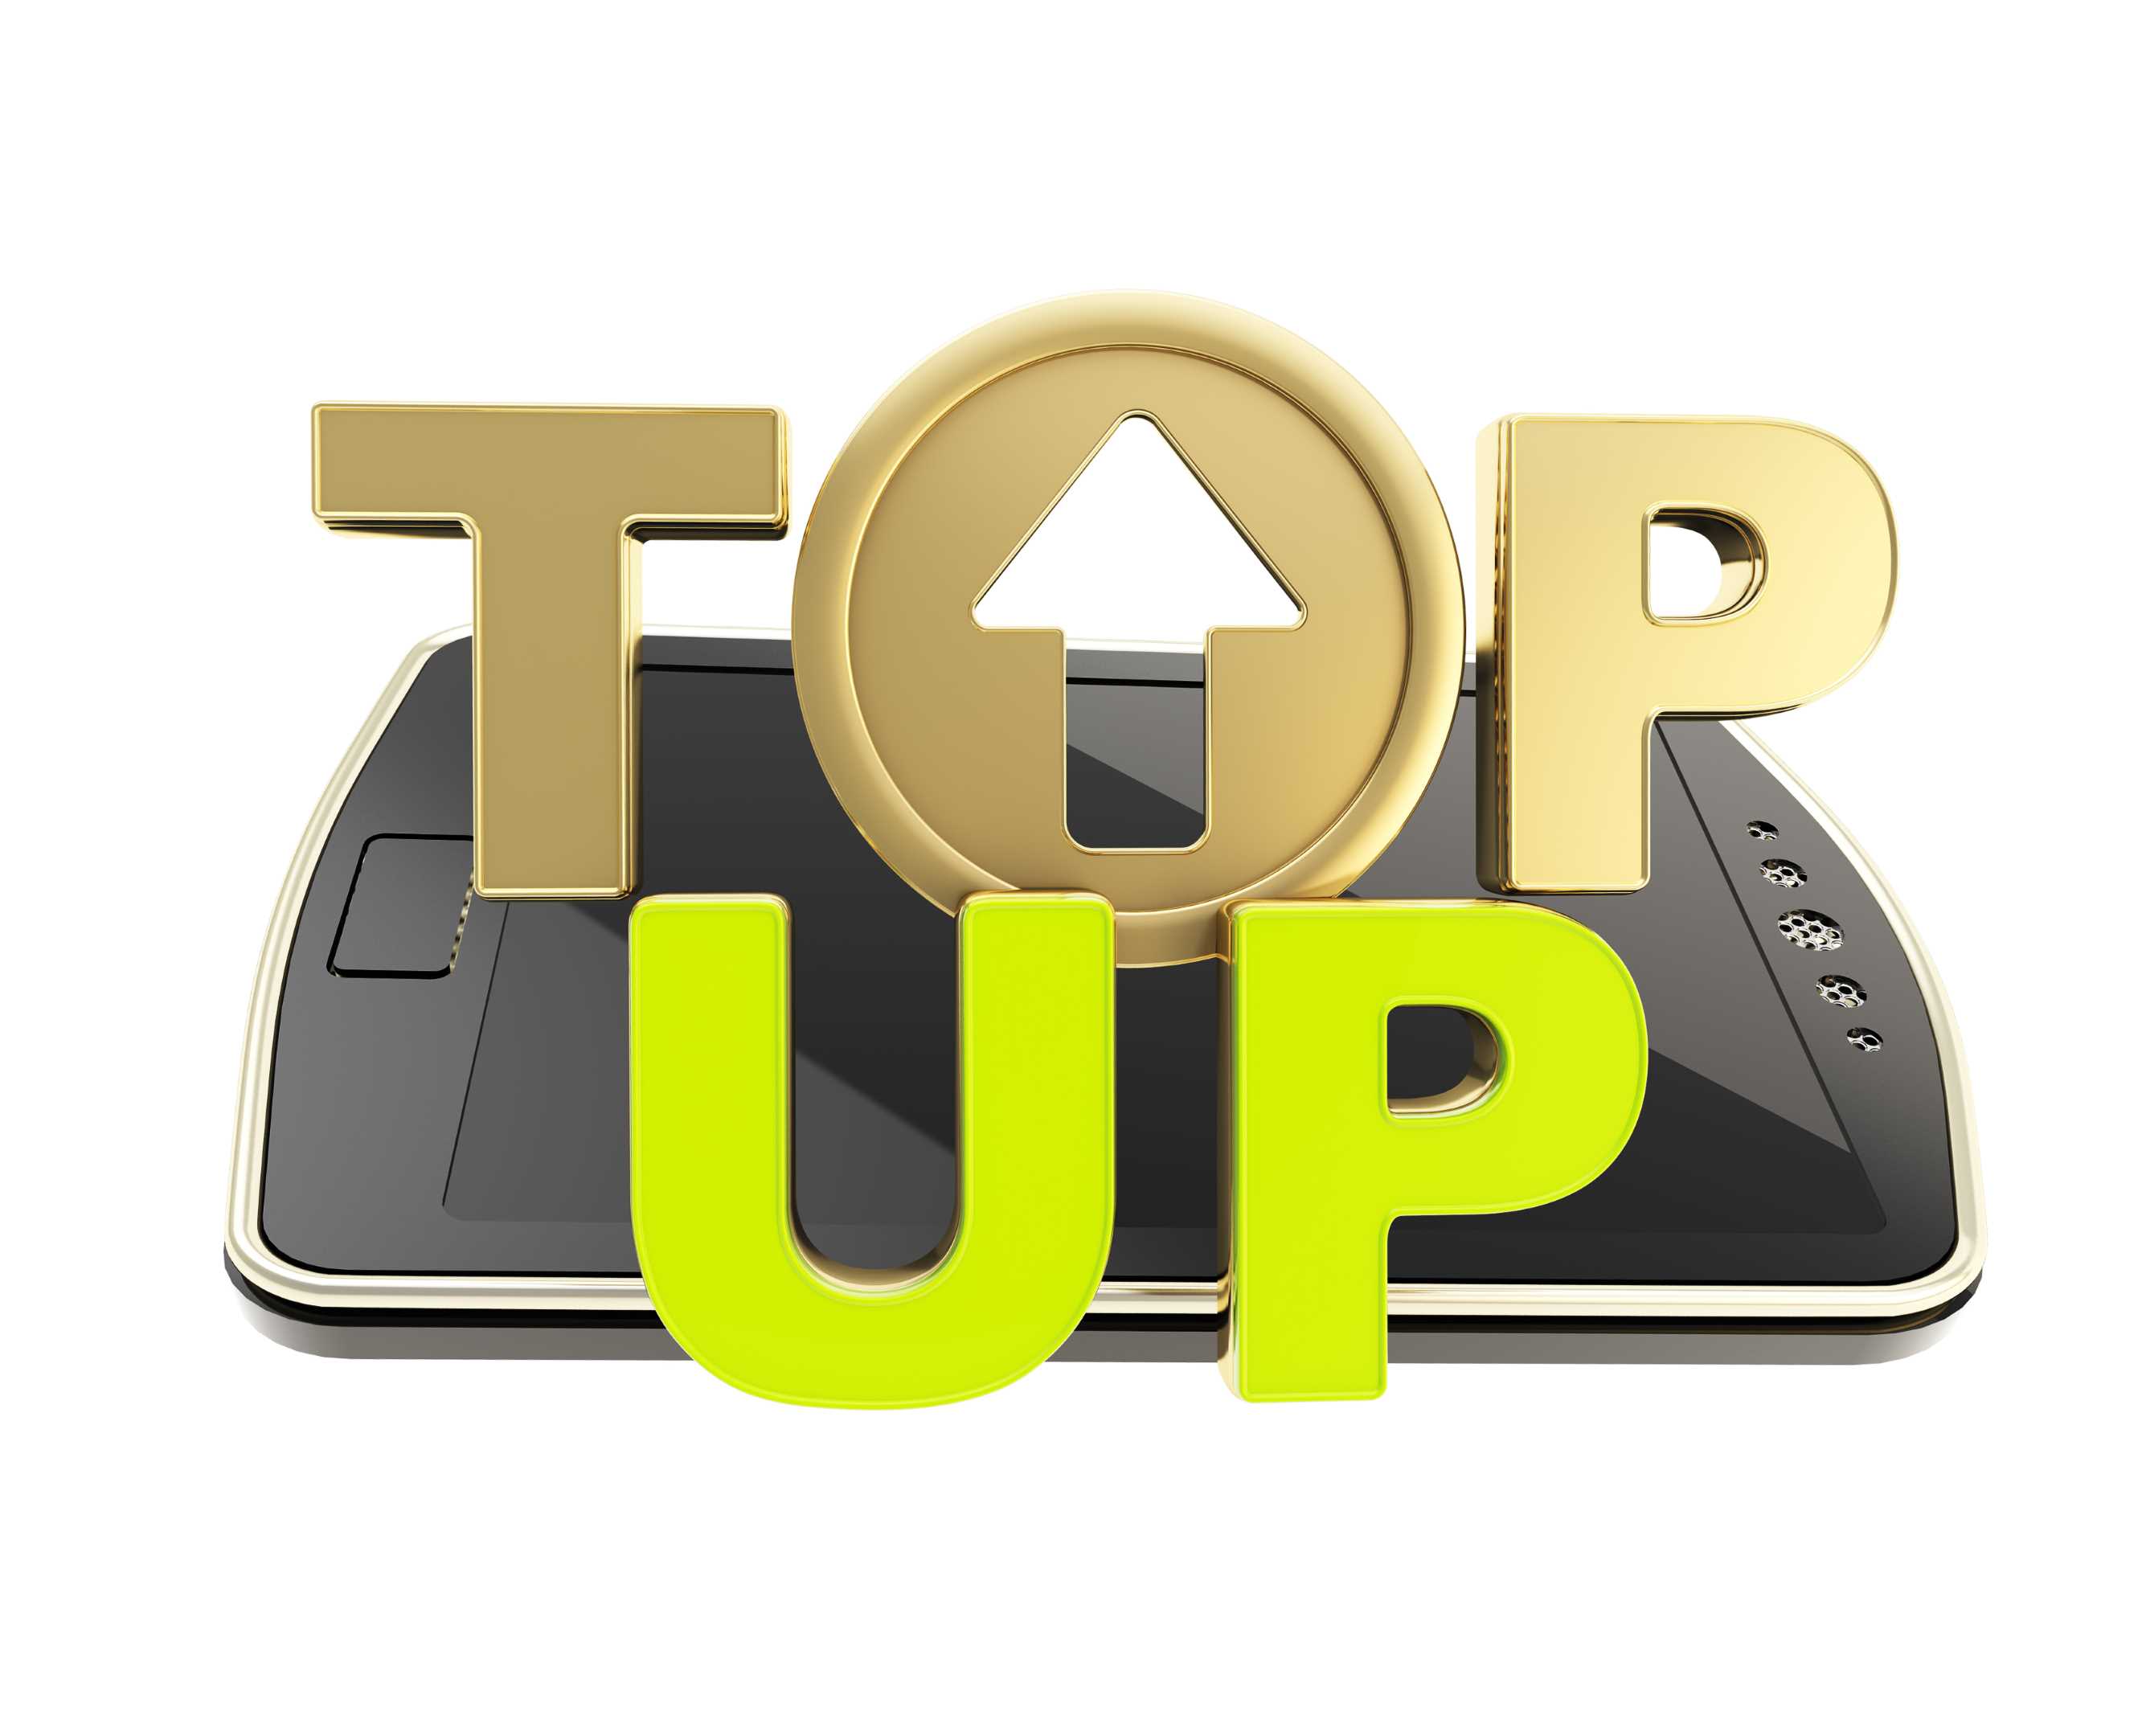 Top up сайт. Top up. Логотип ПОПОЛНИ ряд. Top-up service. Иконка overpluse.